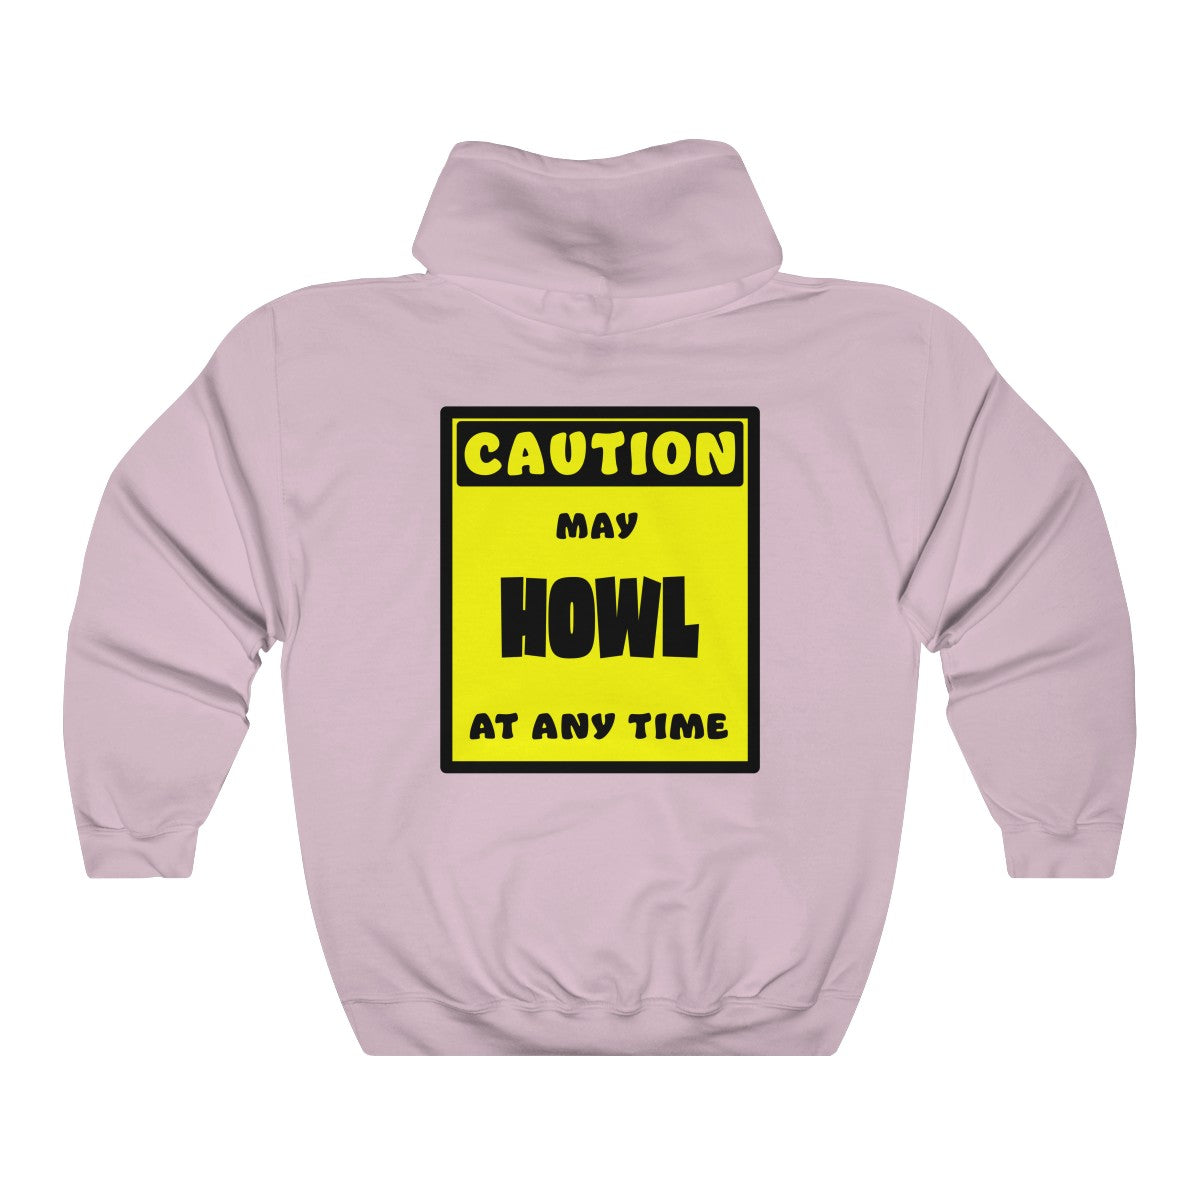 CAUTION! May HOWL at any time! - Hoodie Hoodie AFLT-Whootorca Light Pink S 